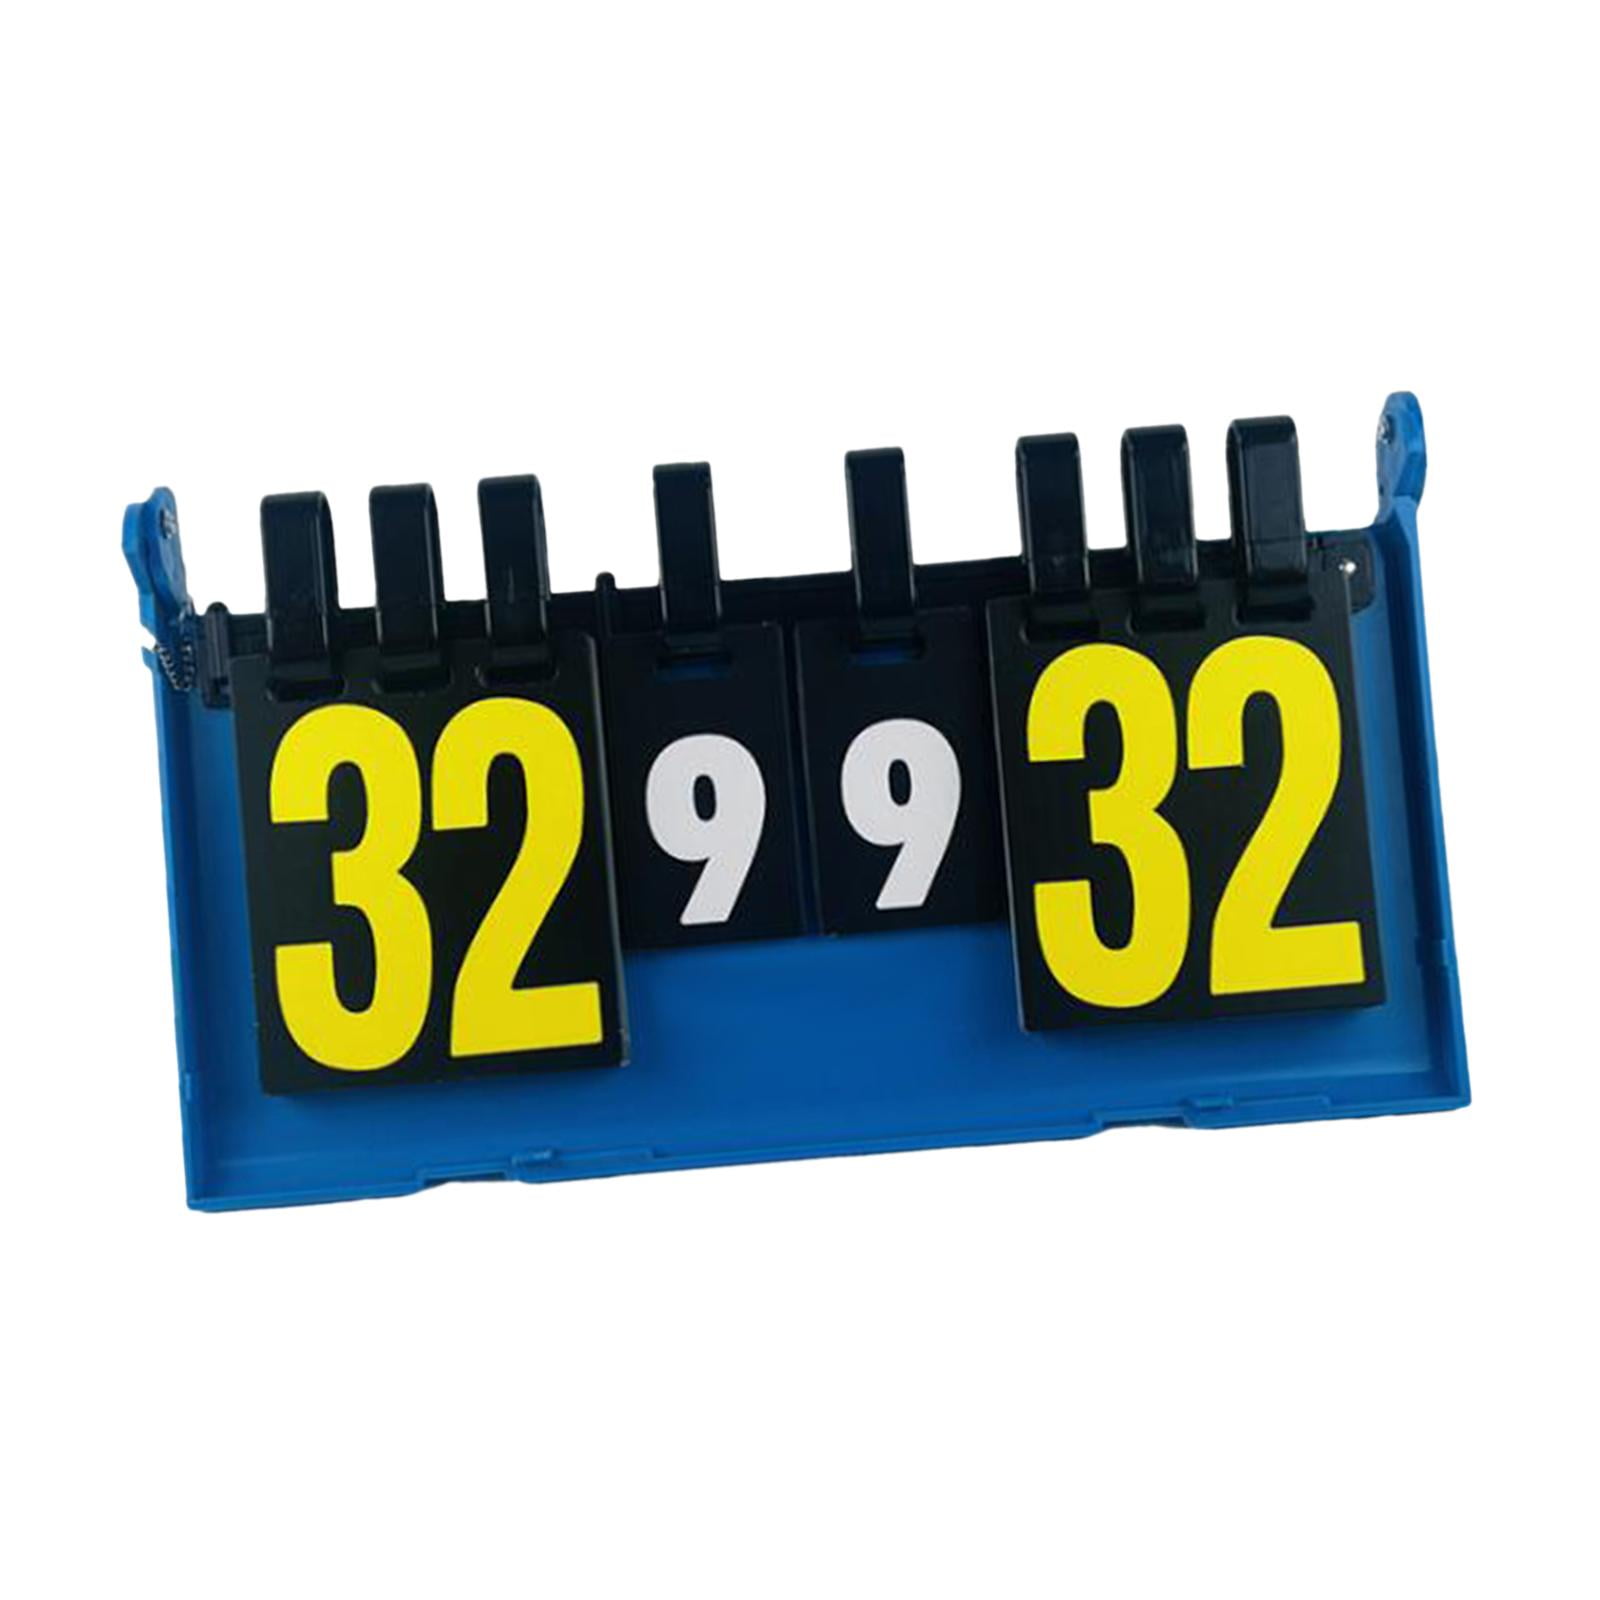 Scoreboard Score Keeper Scoring Tool Tabletop or Hanging Large Size Score Flip 6 digits for Volleyball Soccer Indoor Outdoor Tennis Baseball